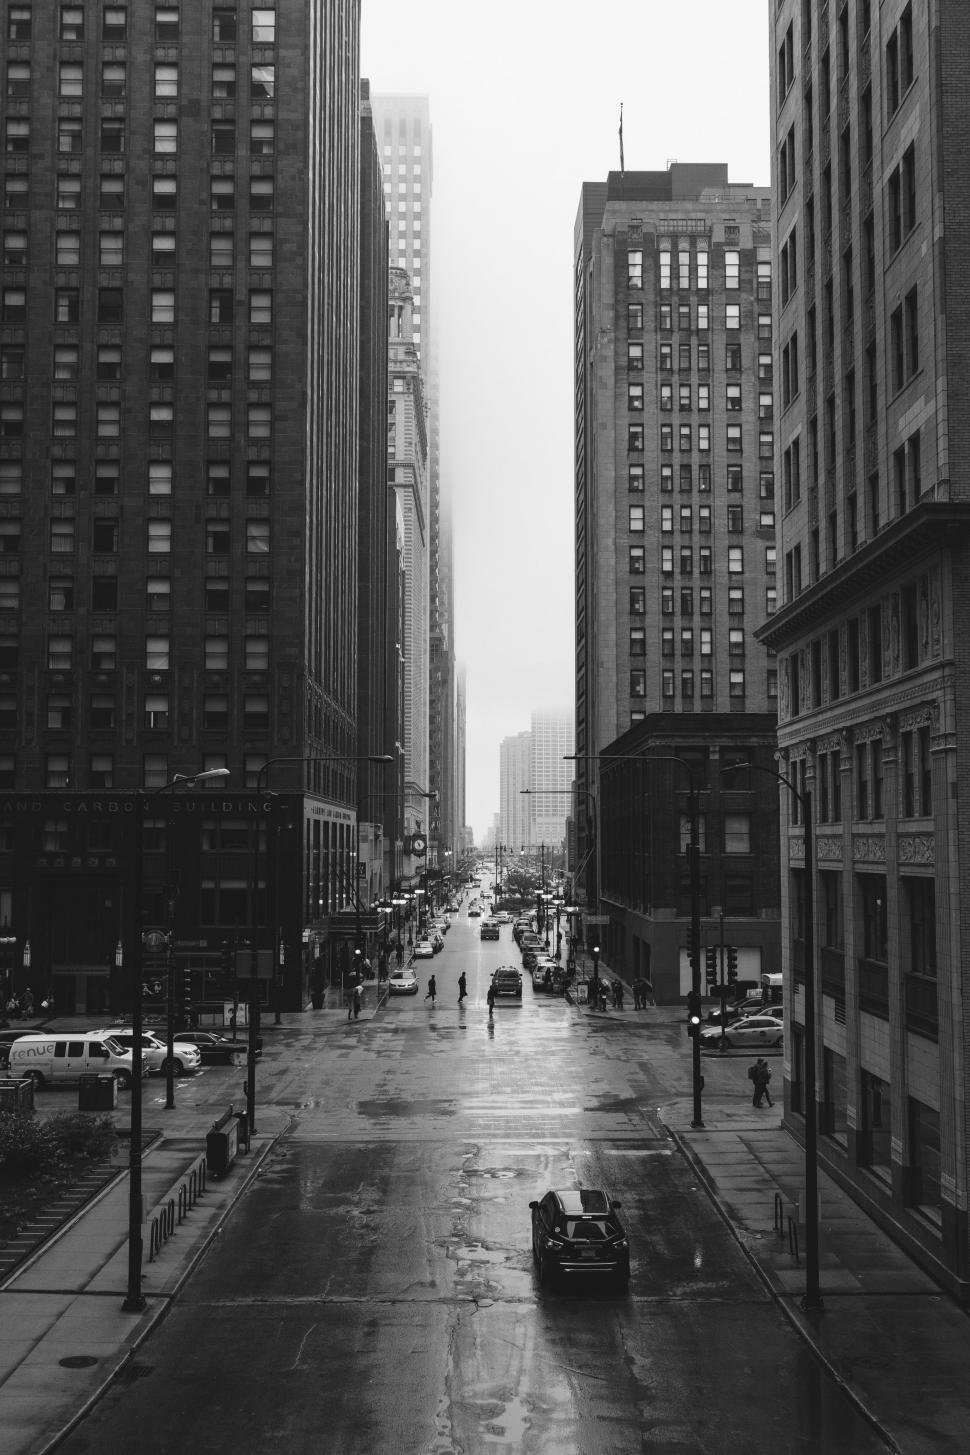 Free Image of Busy City Street in Black and White 